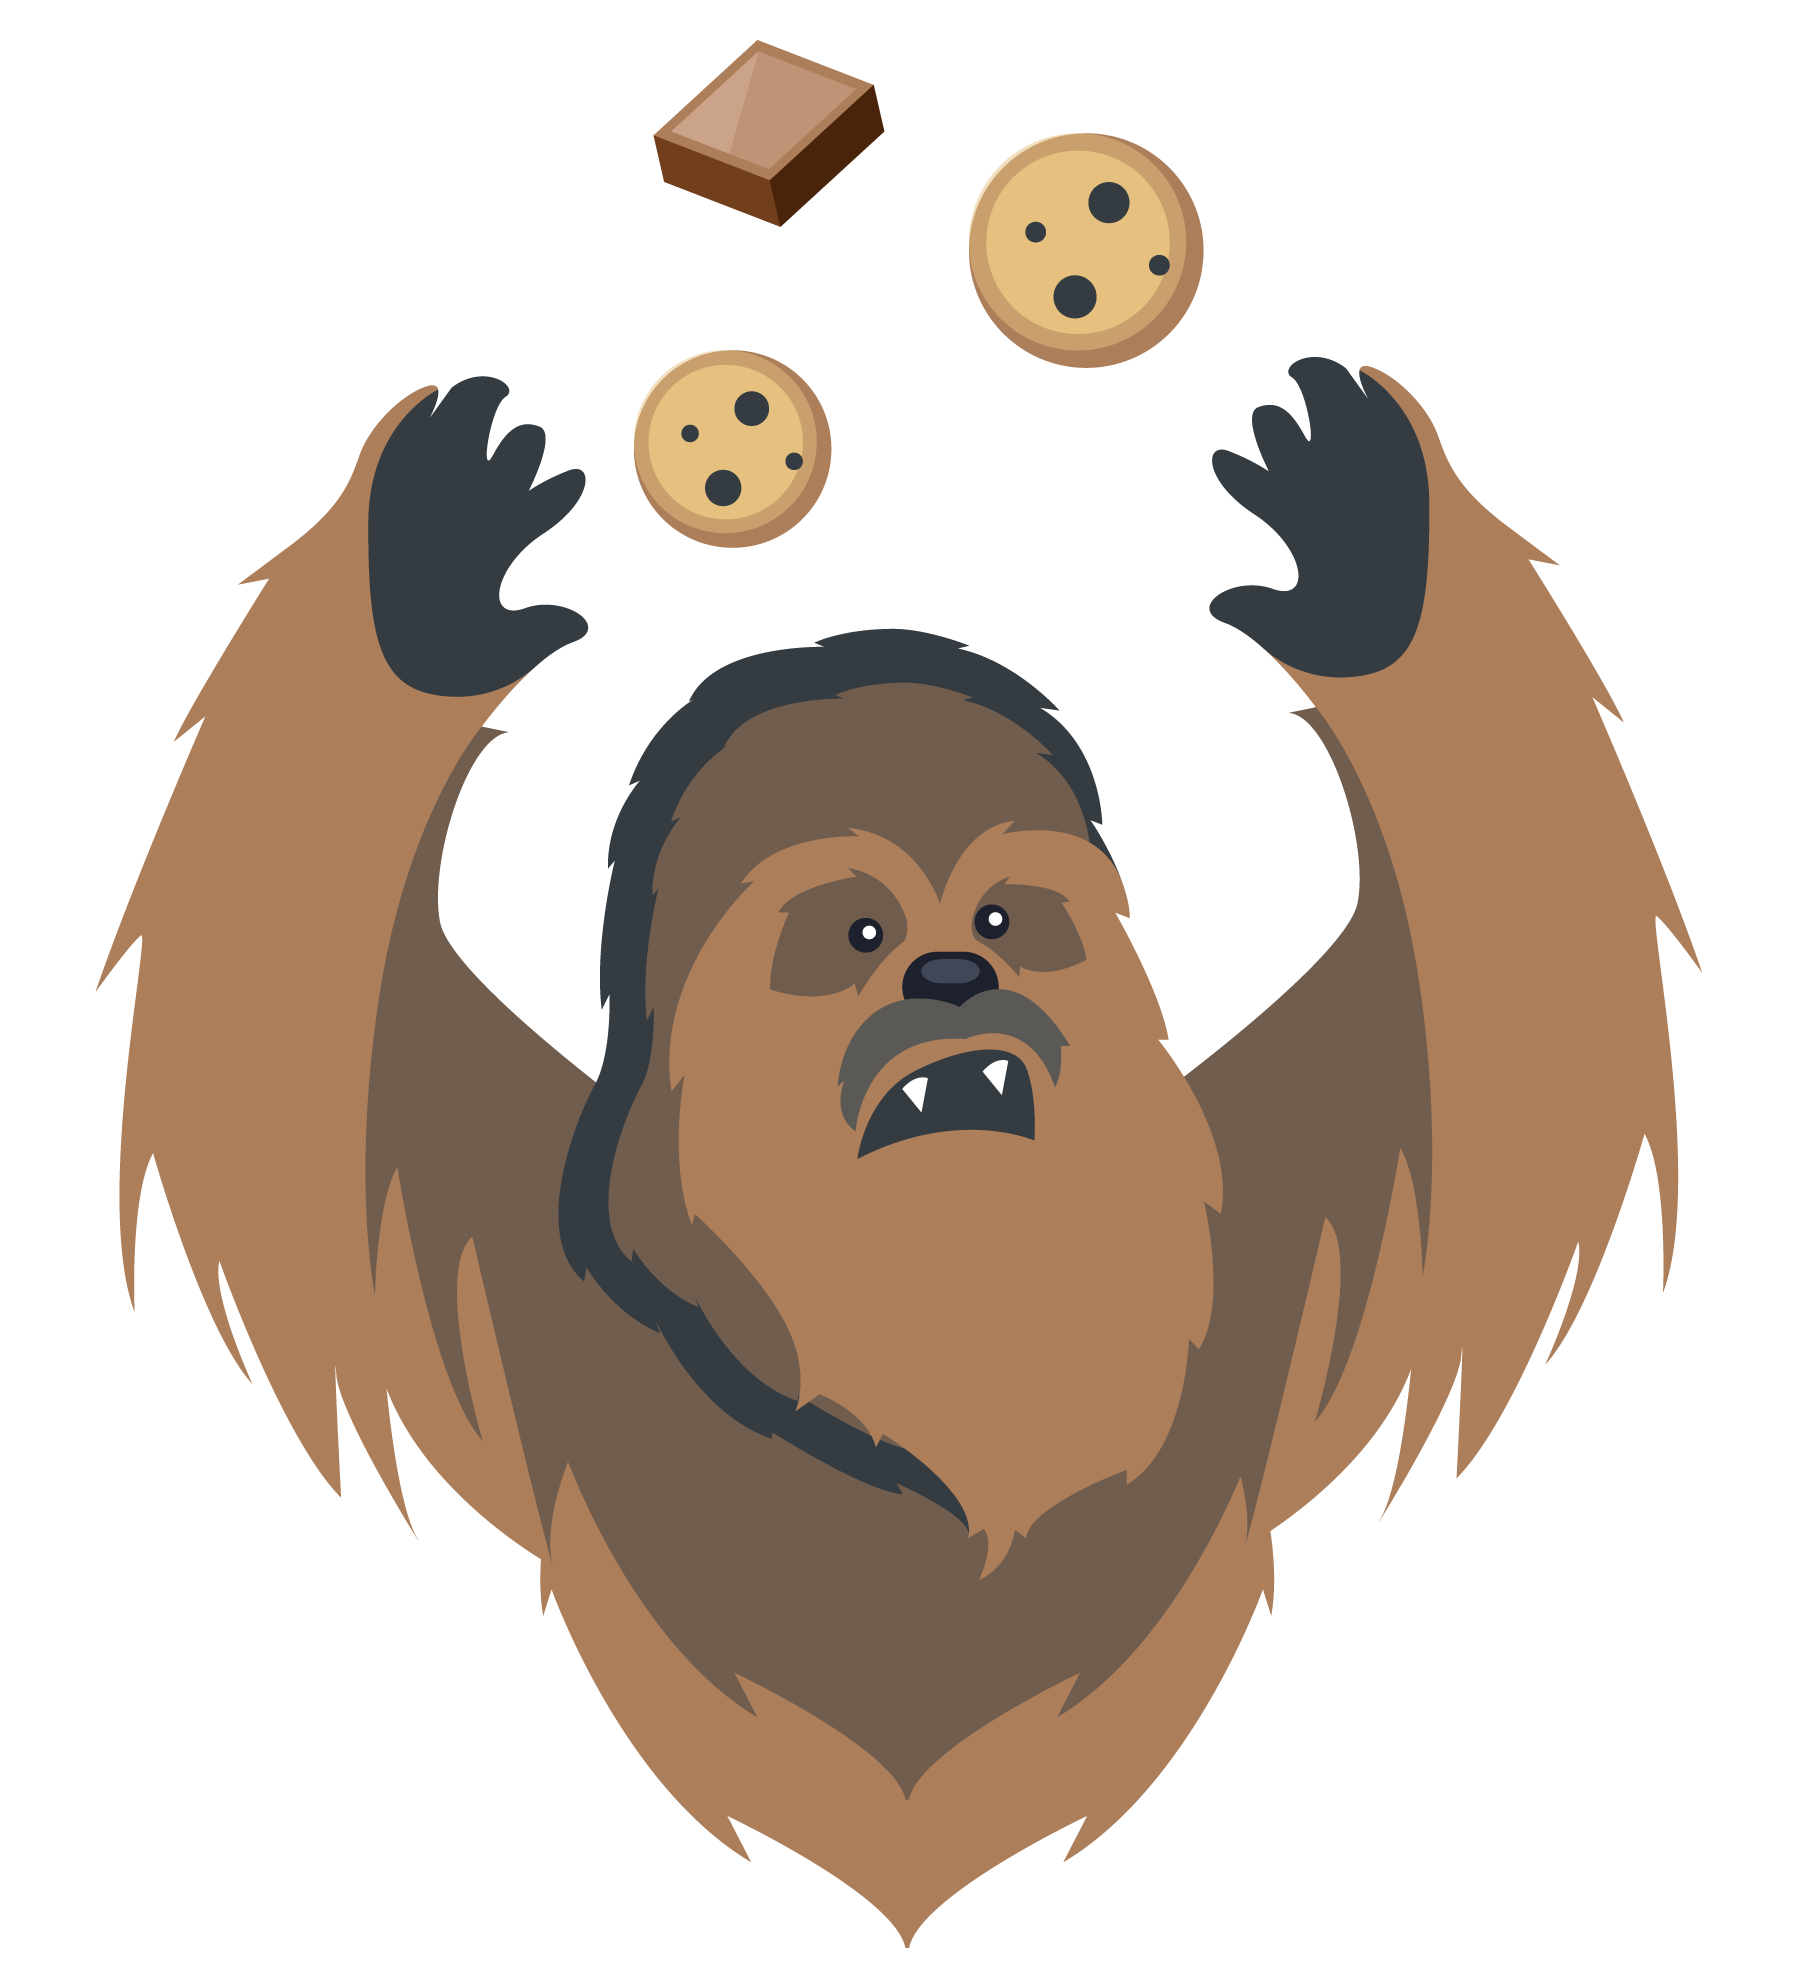 A wookie tossing cookies and a brownie